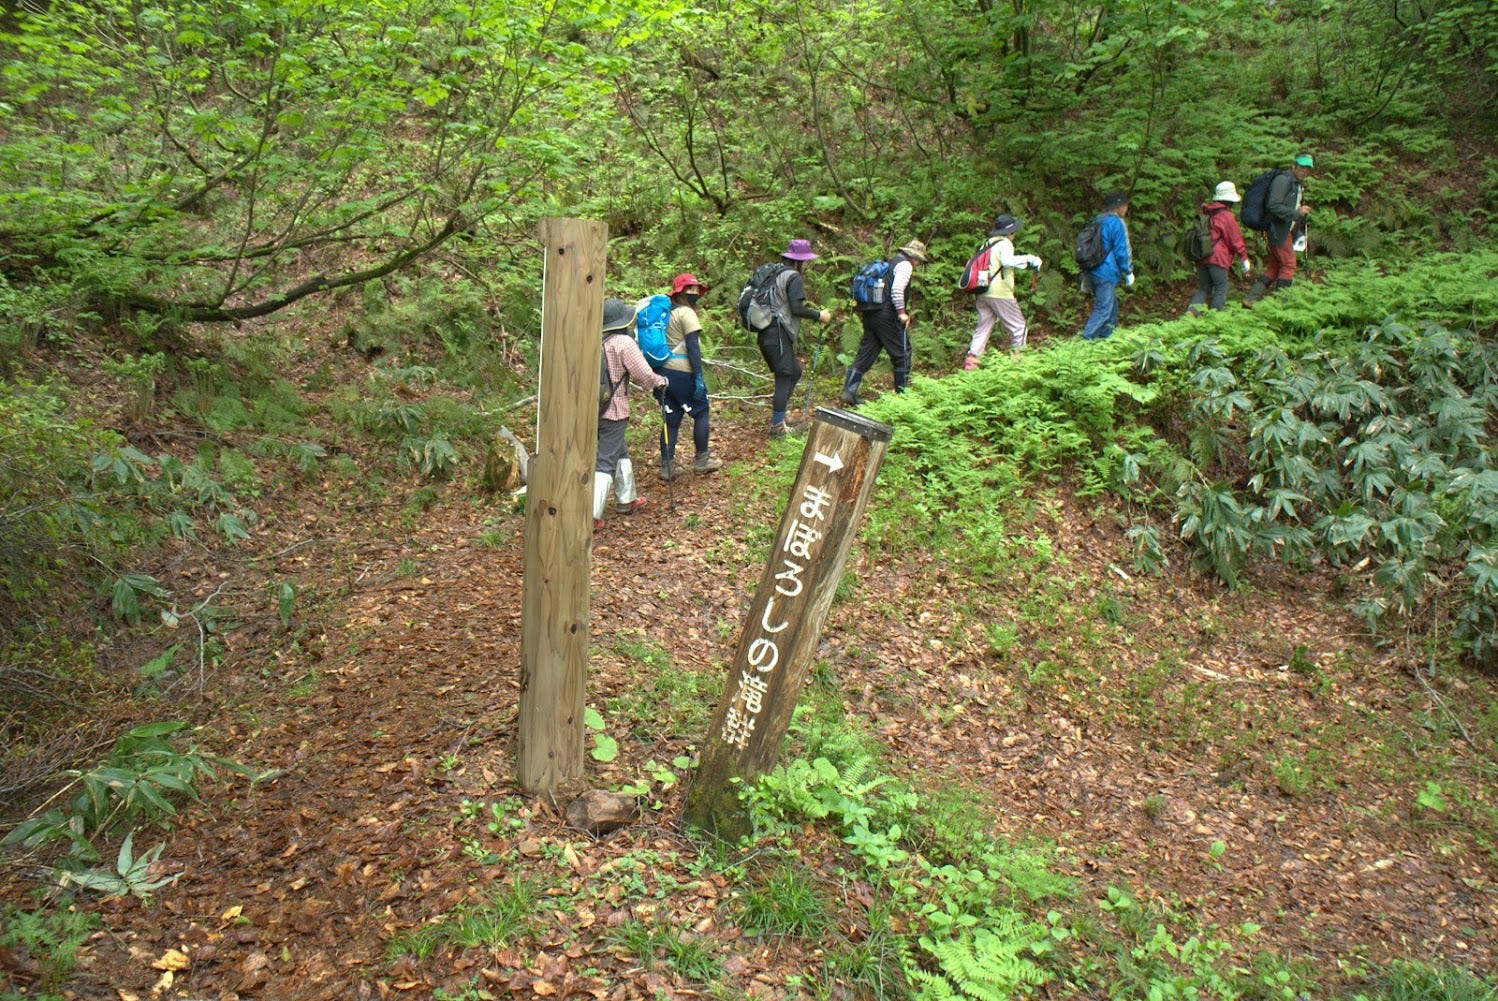 Hikers going up the trail of fallen leaves on Yozo-san surrounded by the bright green leaves of summer